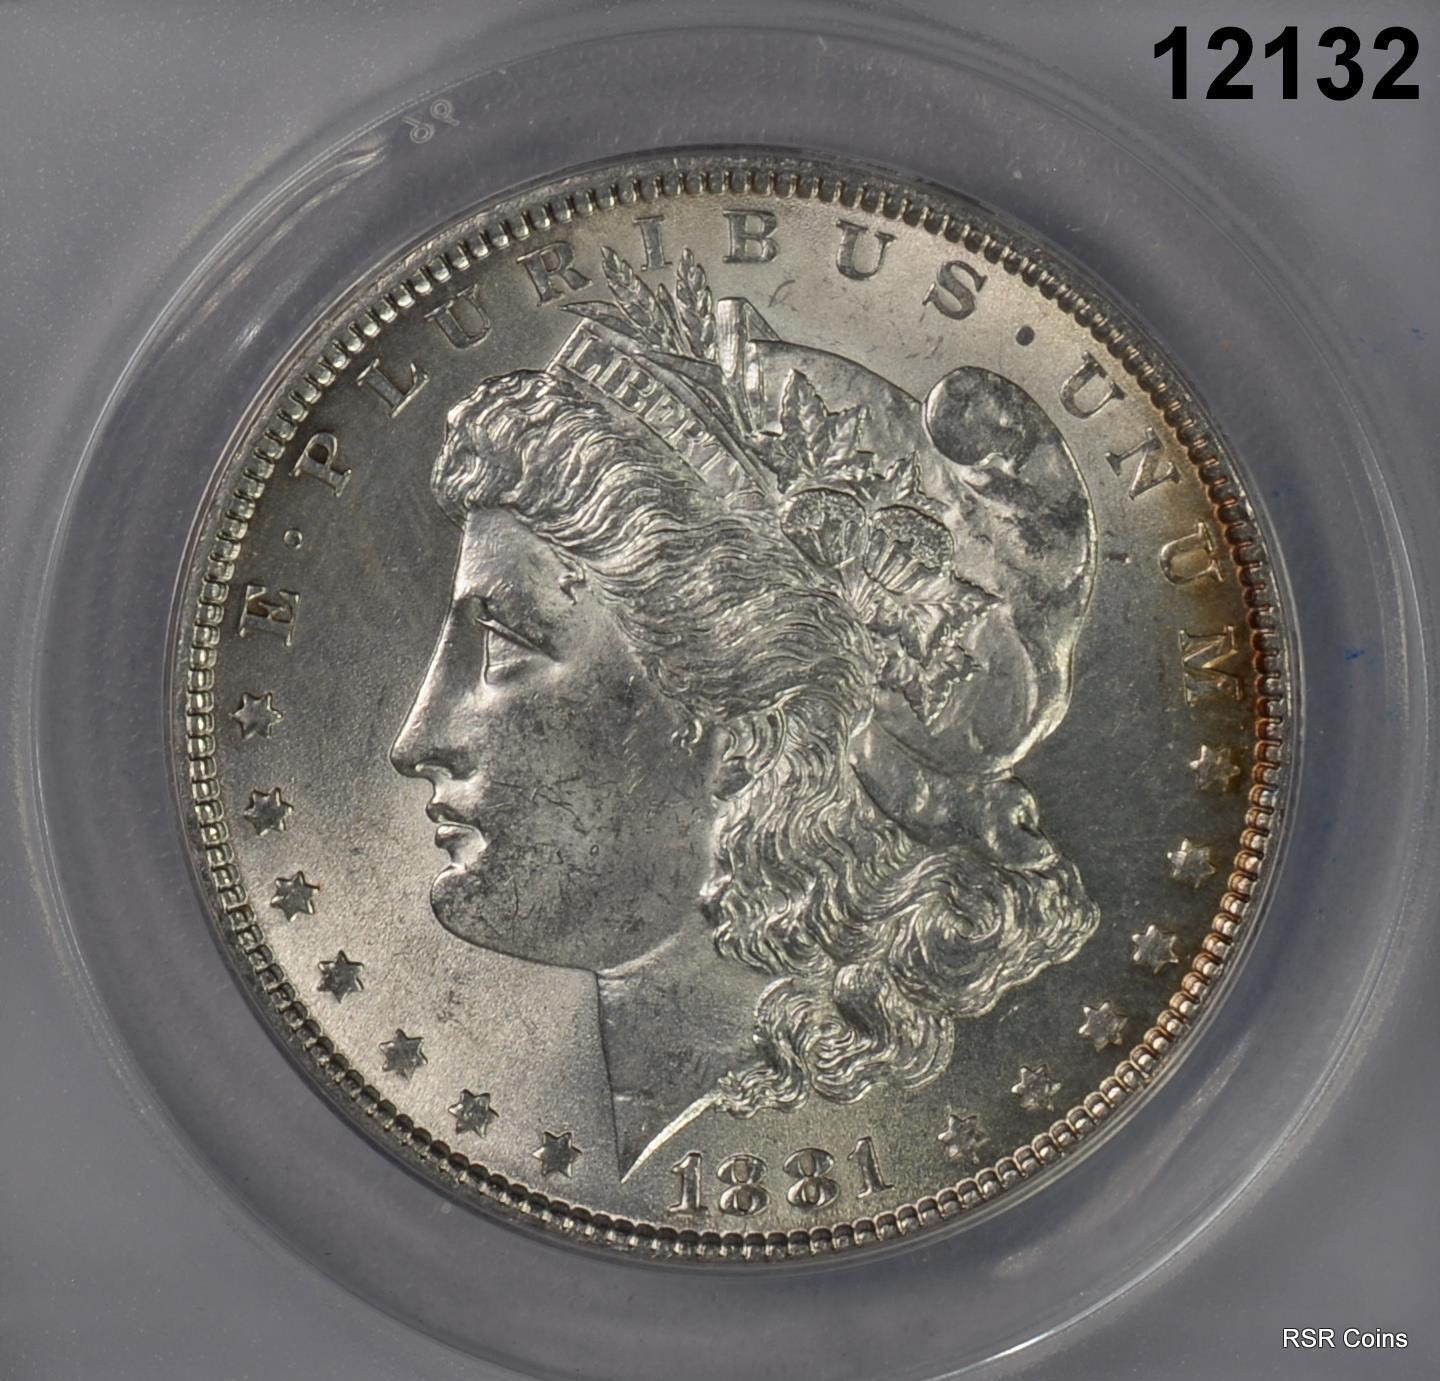 1881 MORGAN SILVER DOLLAR ANACS CERTIFIED MS60 CLEANED LOOKS BETTER! #12132